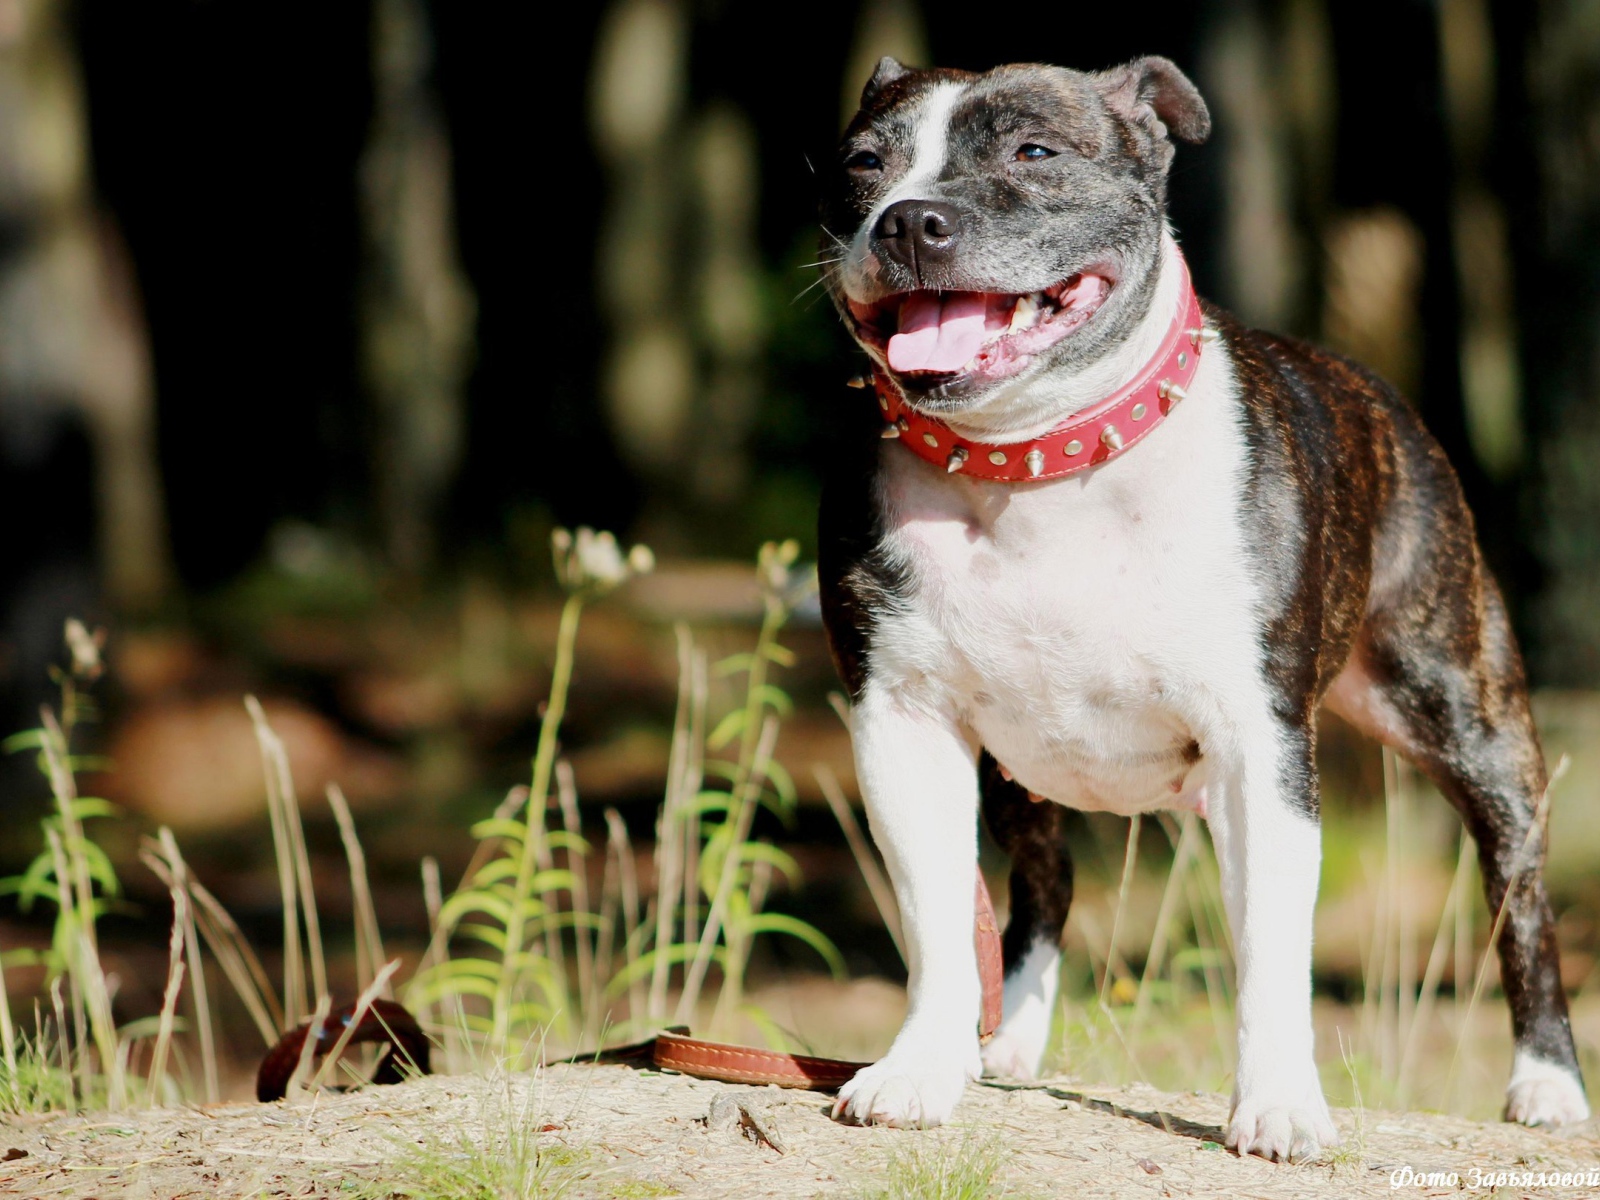 Staffordshire Bull Terrier in the red collar